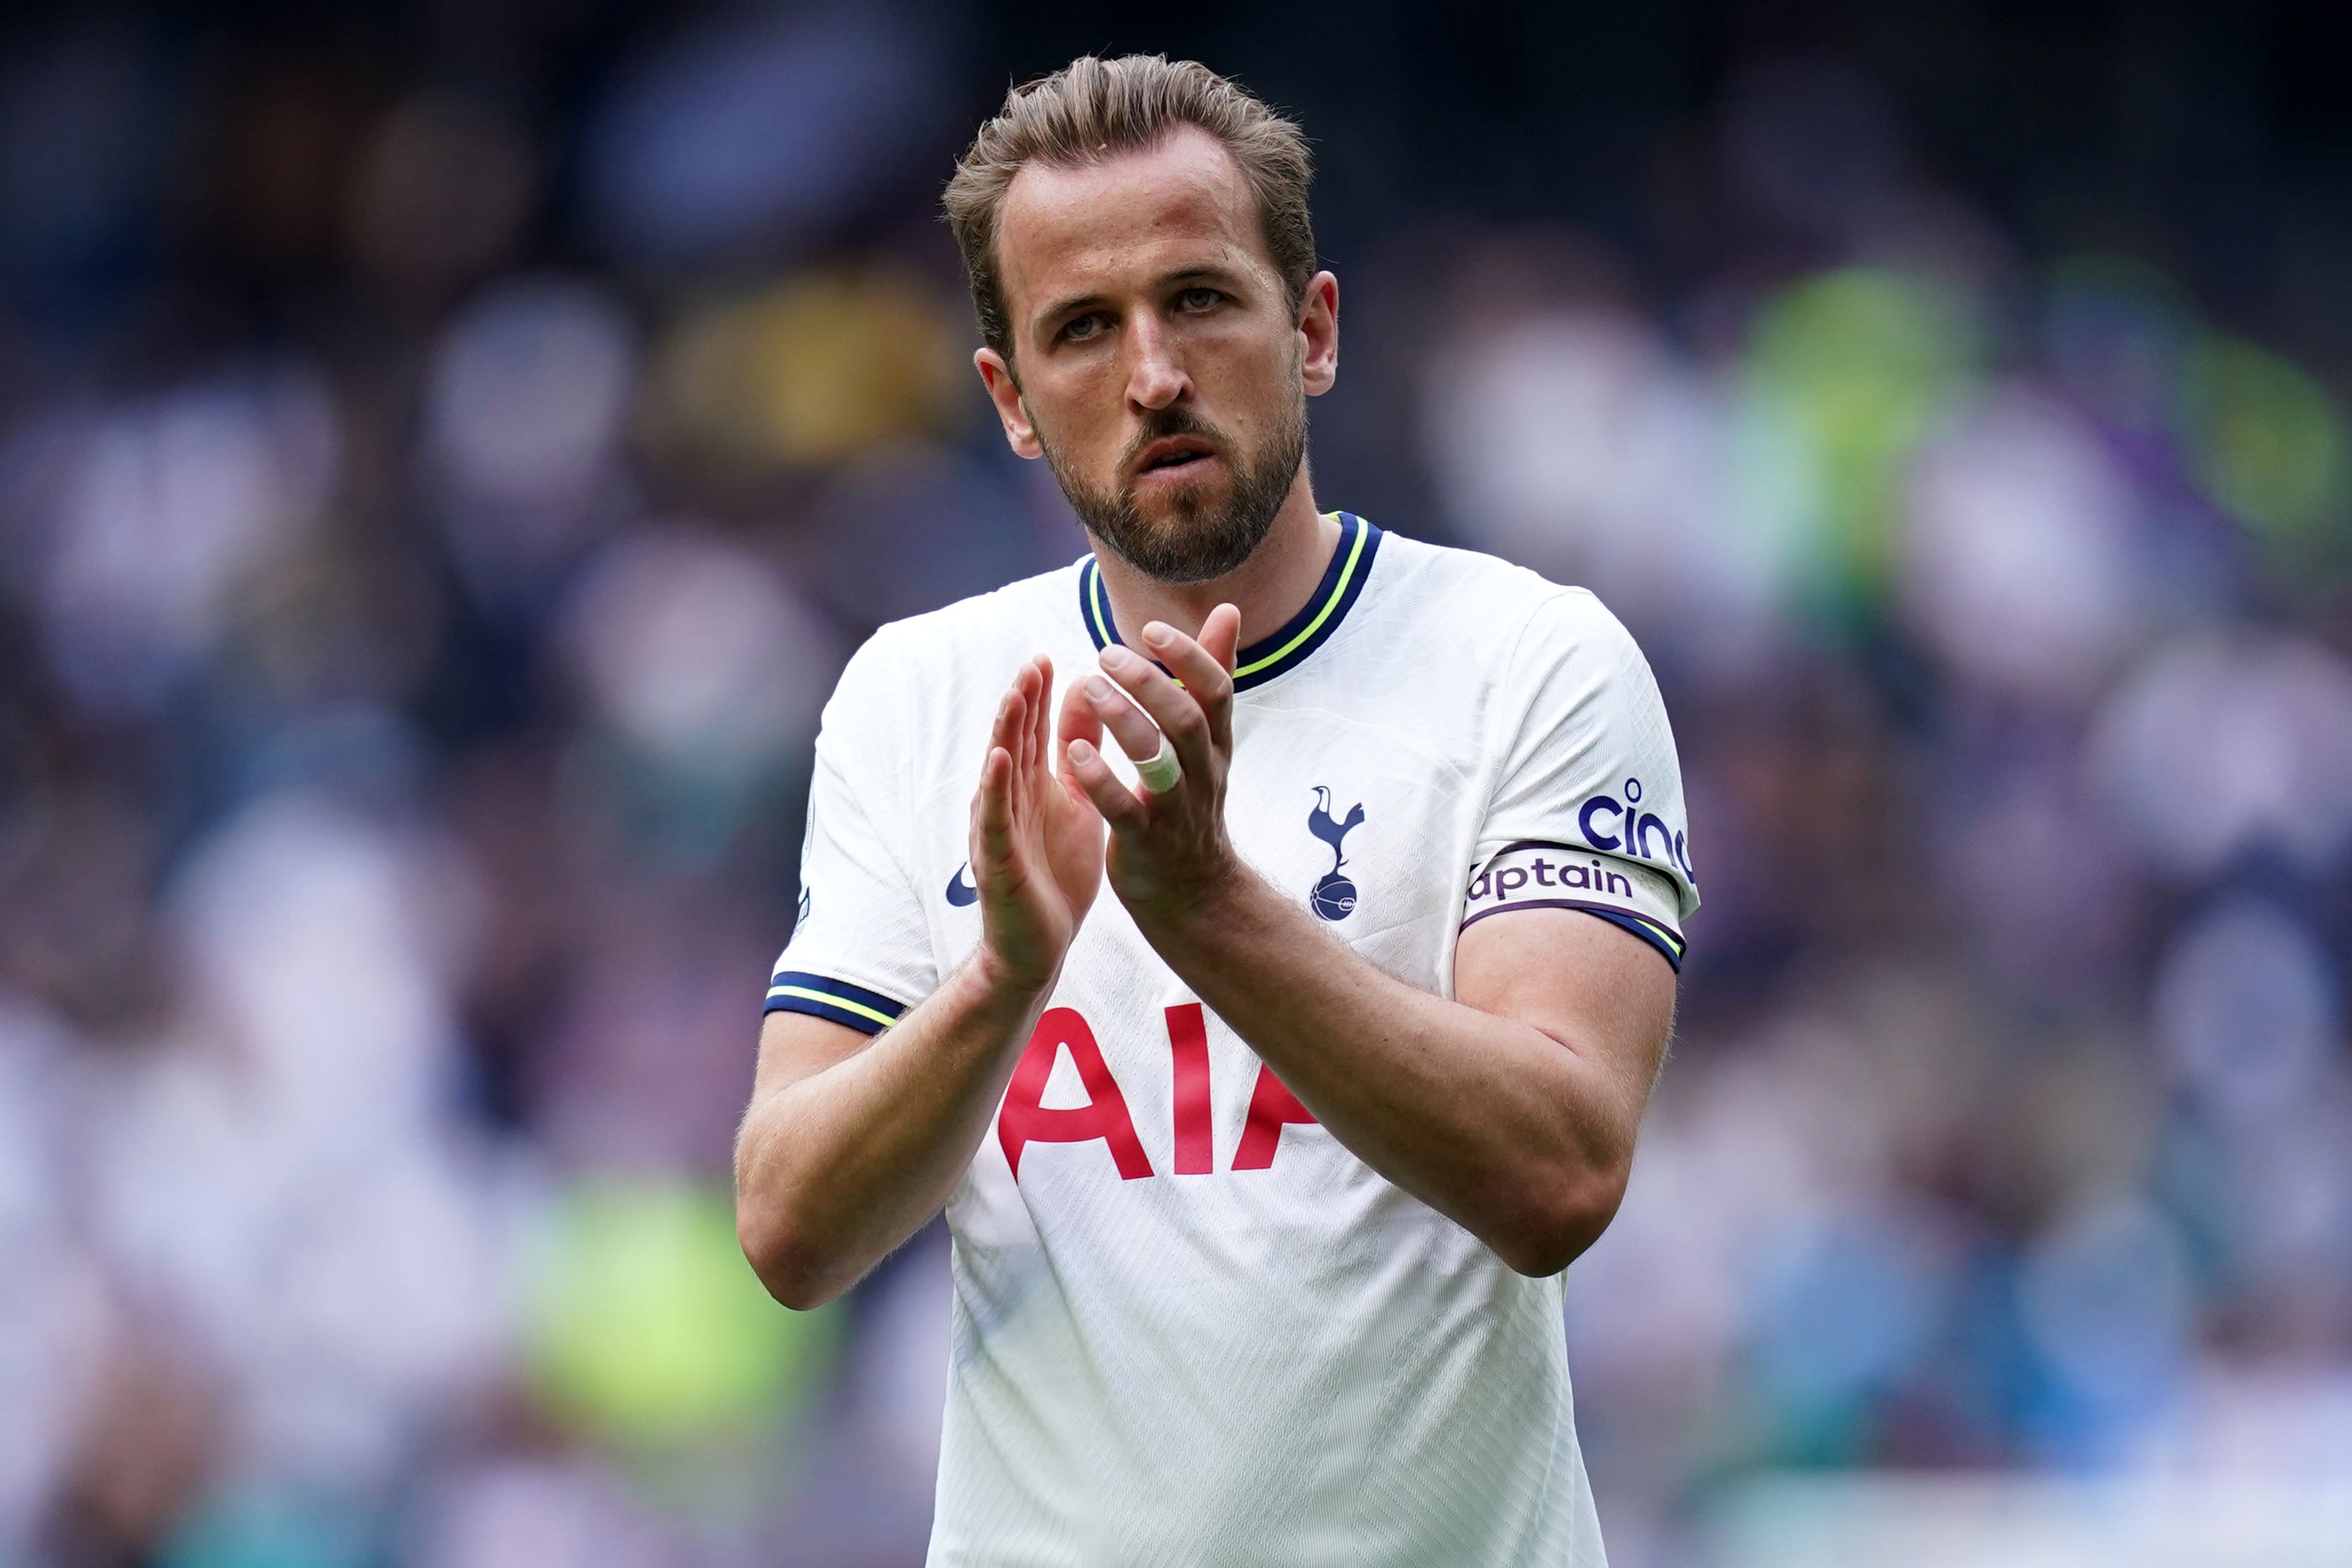  Harry Kane, the England and Tottenham Hotspur captain, applauding the crowd after a match.